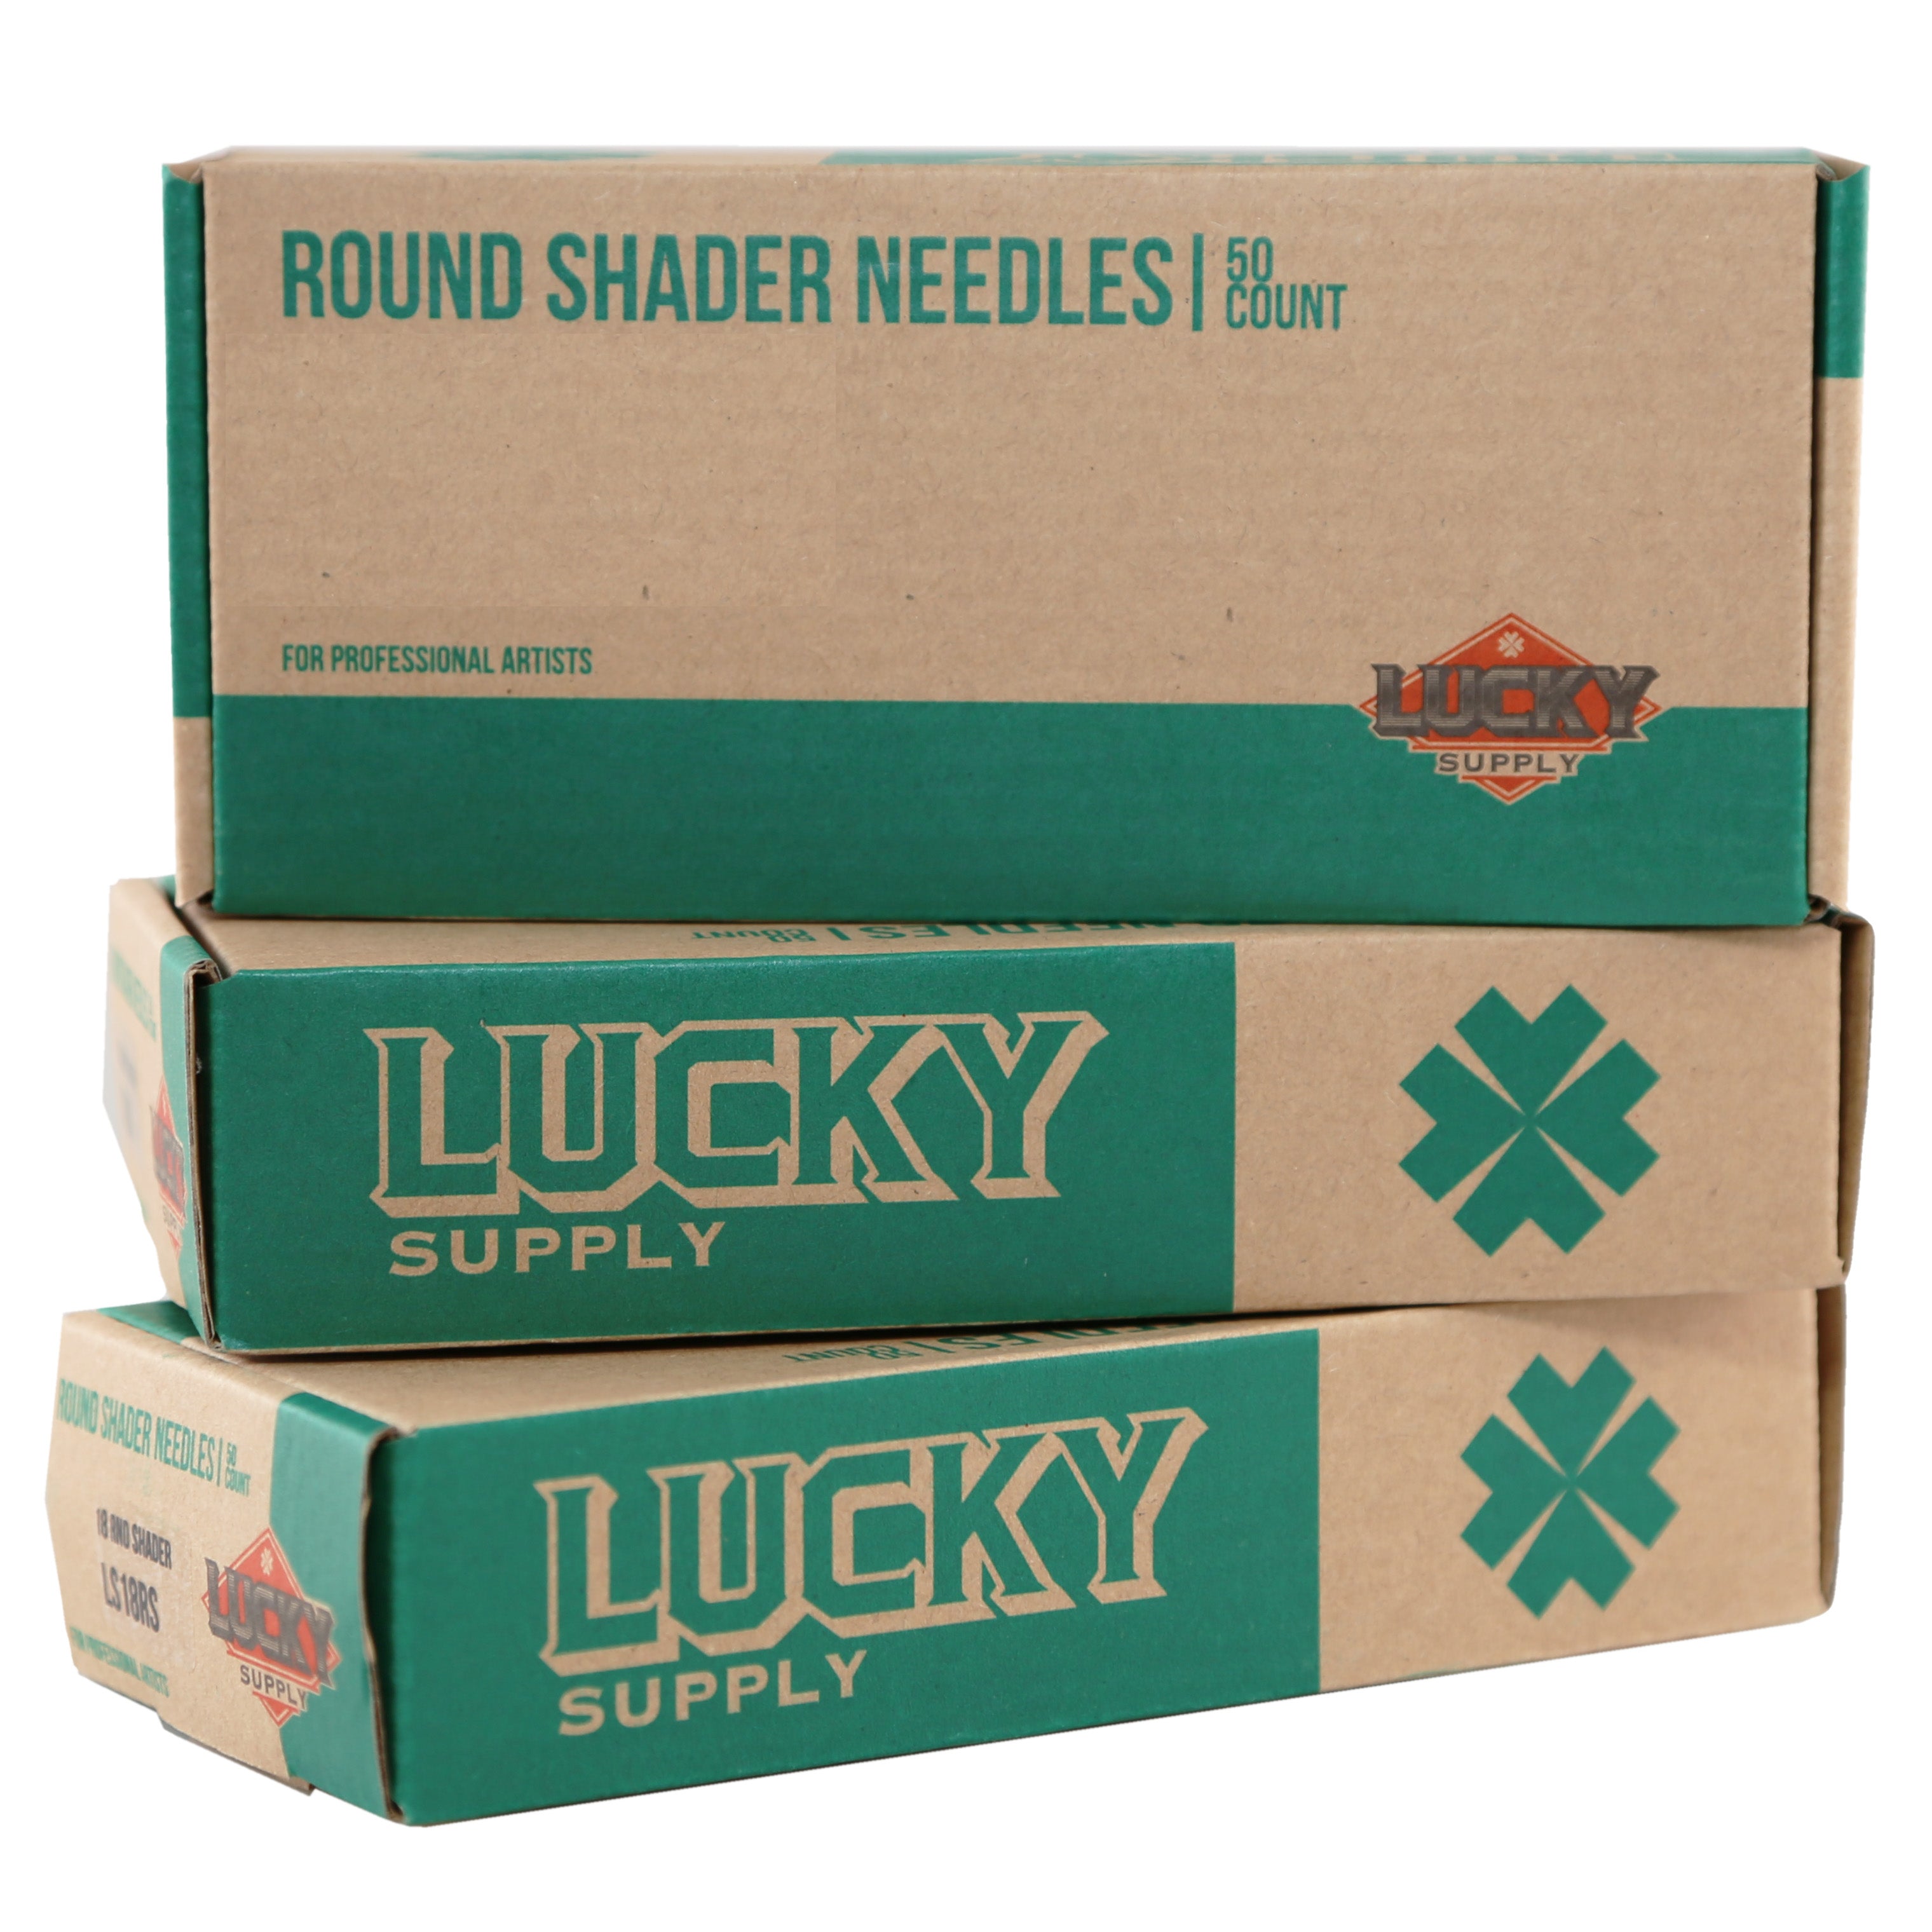 Round Shader Needles by Lucky Supply